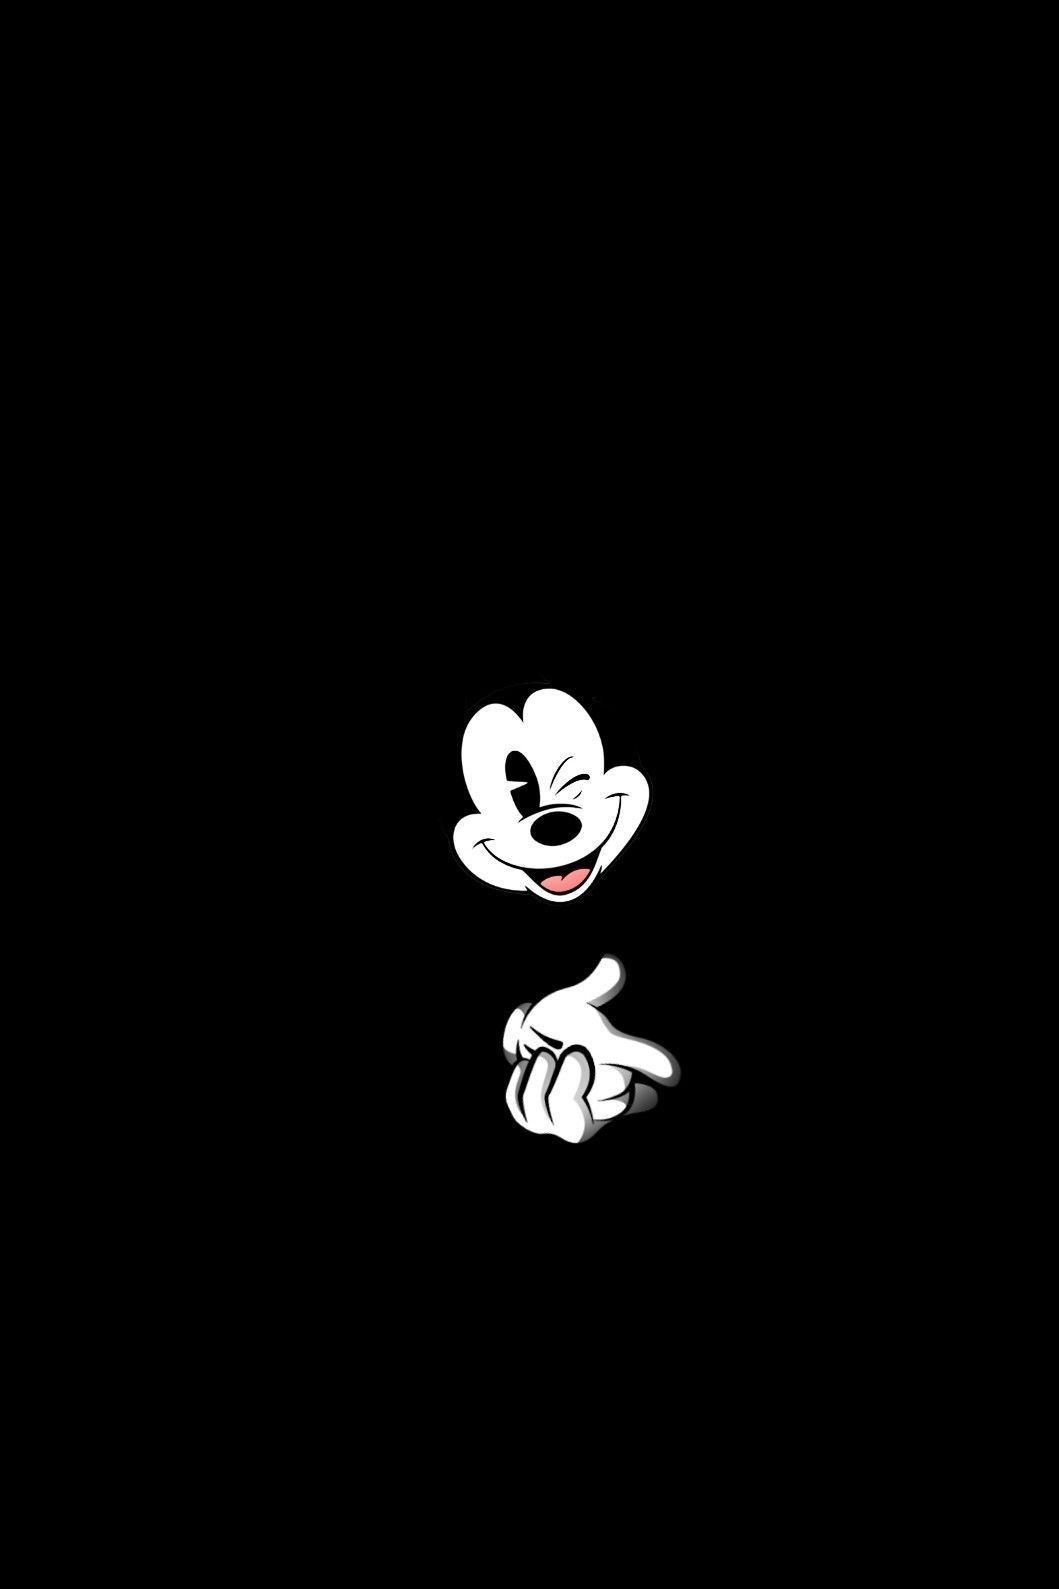 Disney Images Black And White Wallpapers